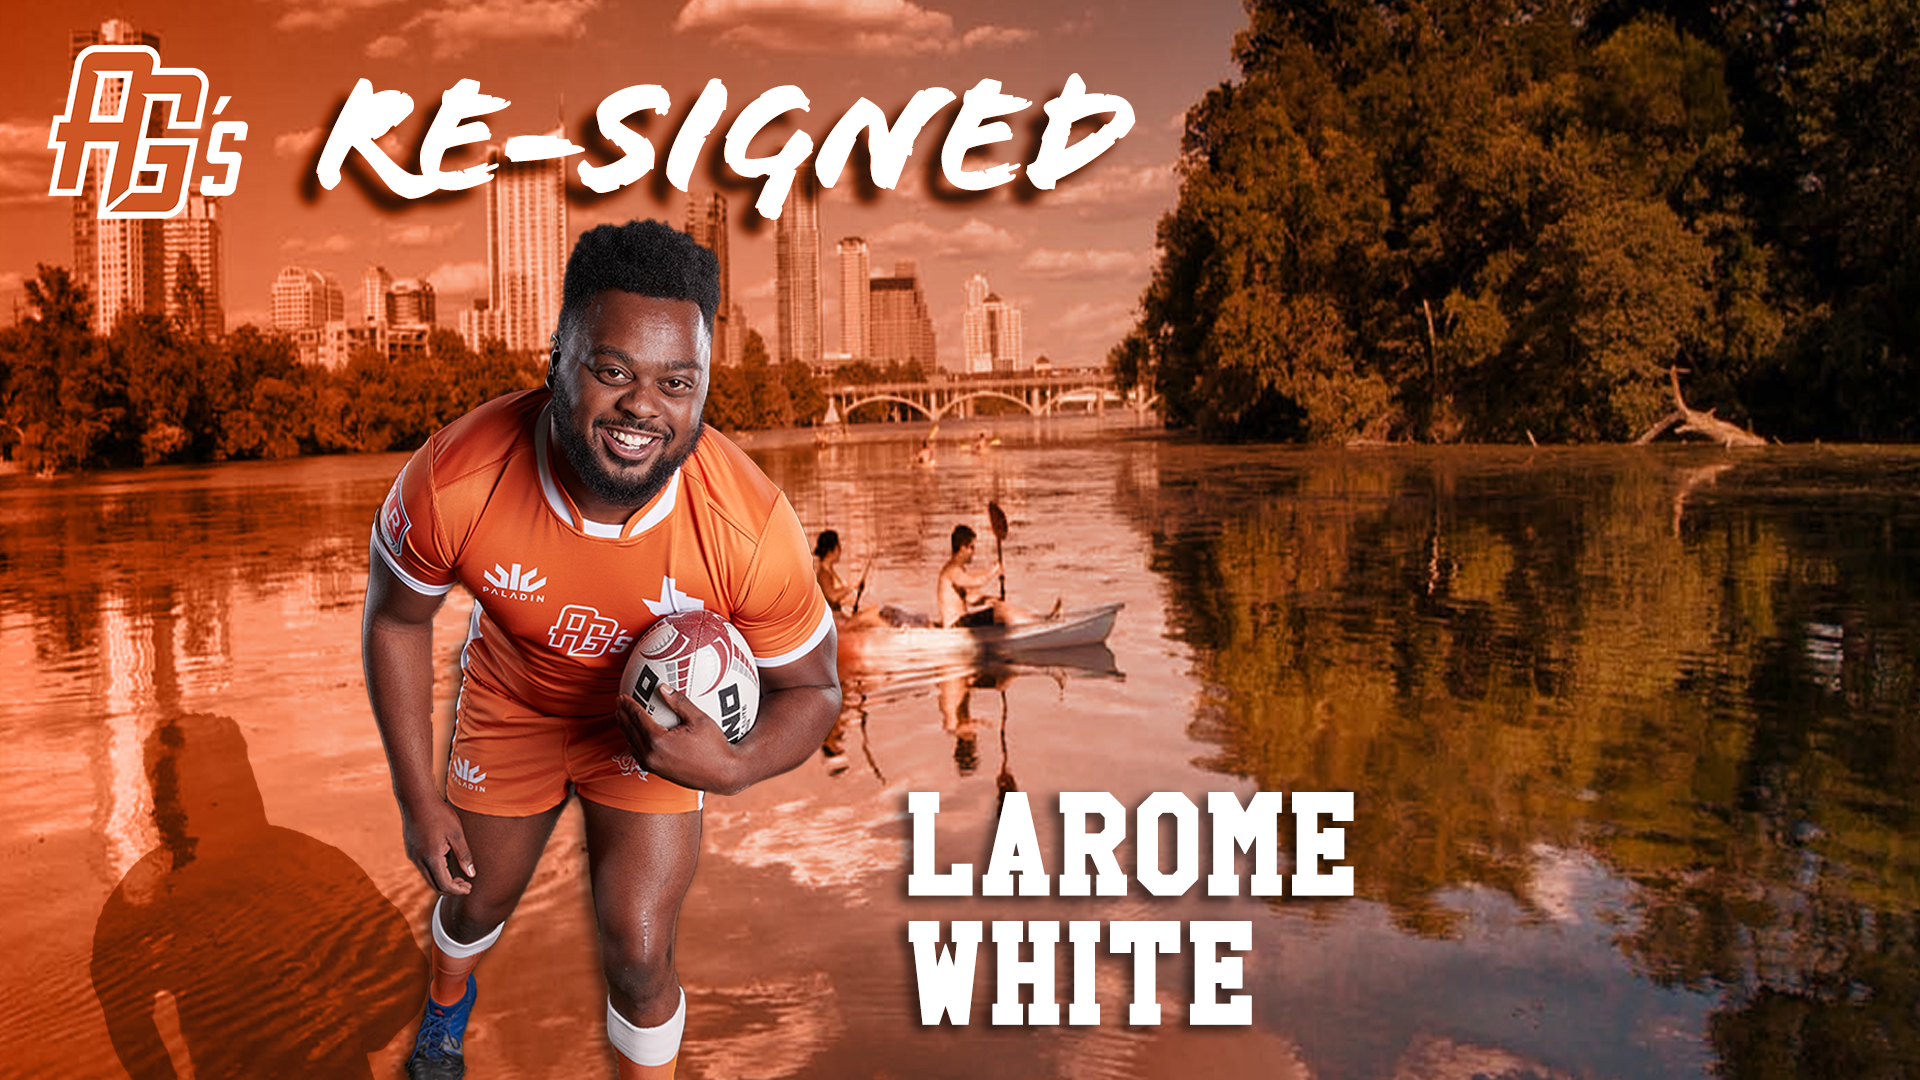 AG’s RE-SIGN PROP LAROME WHITE